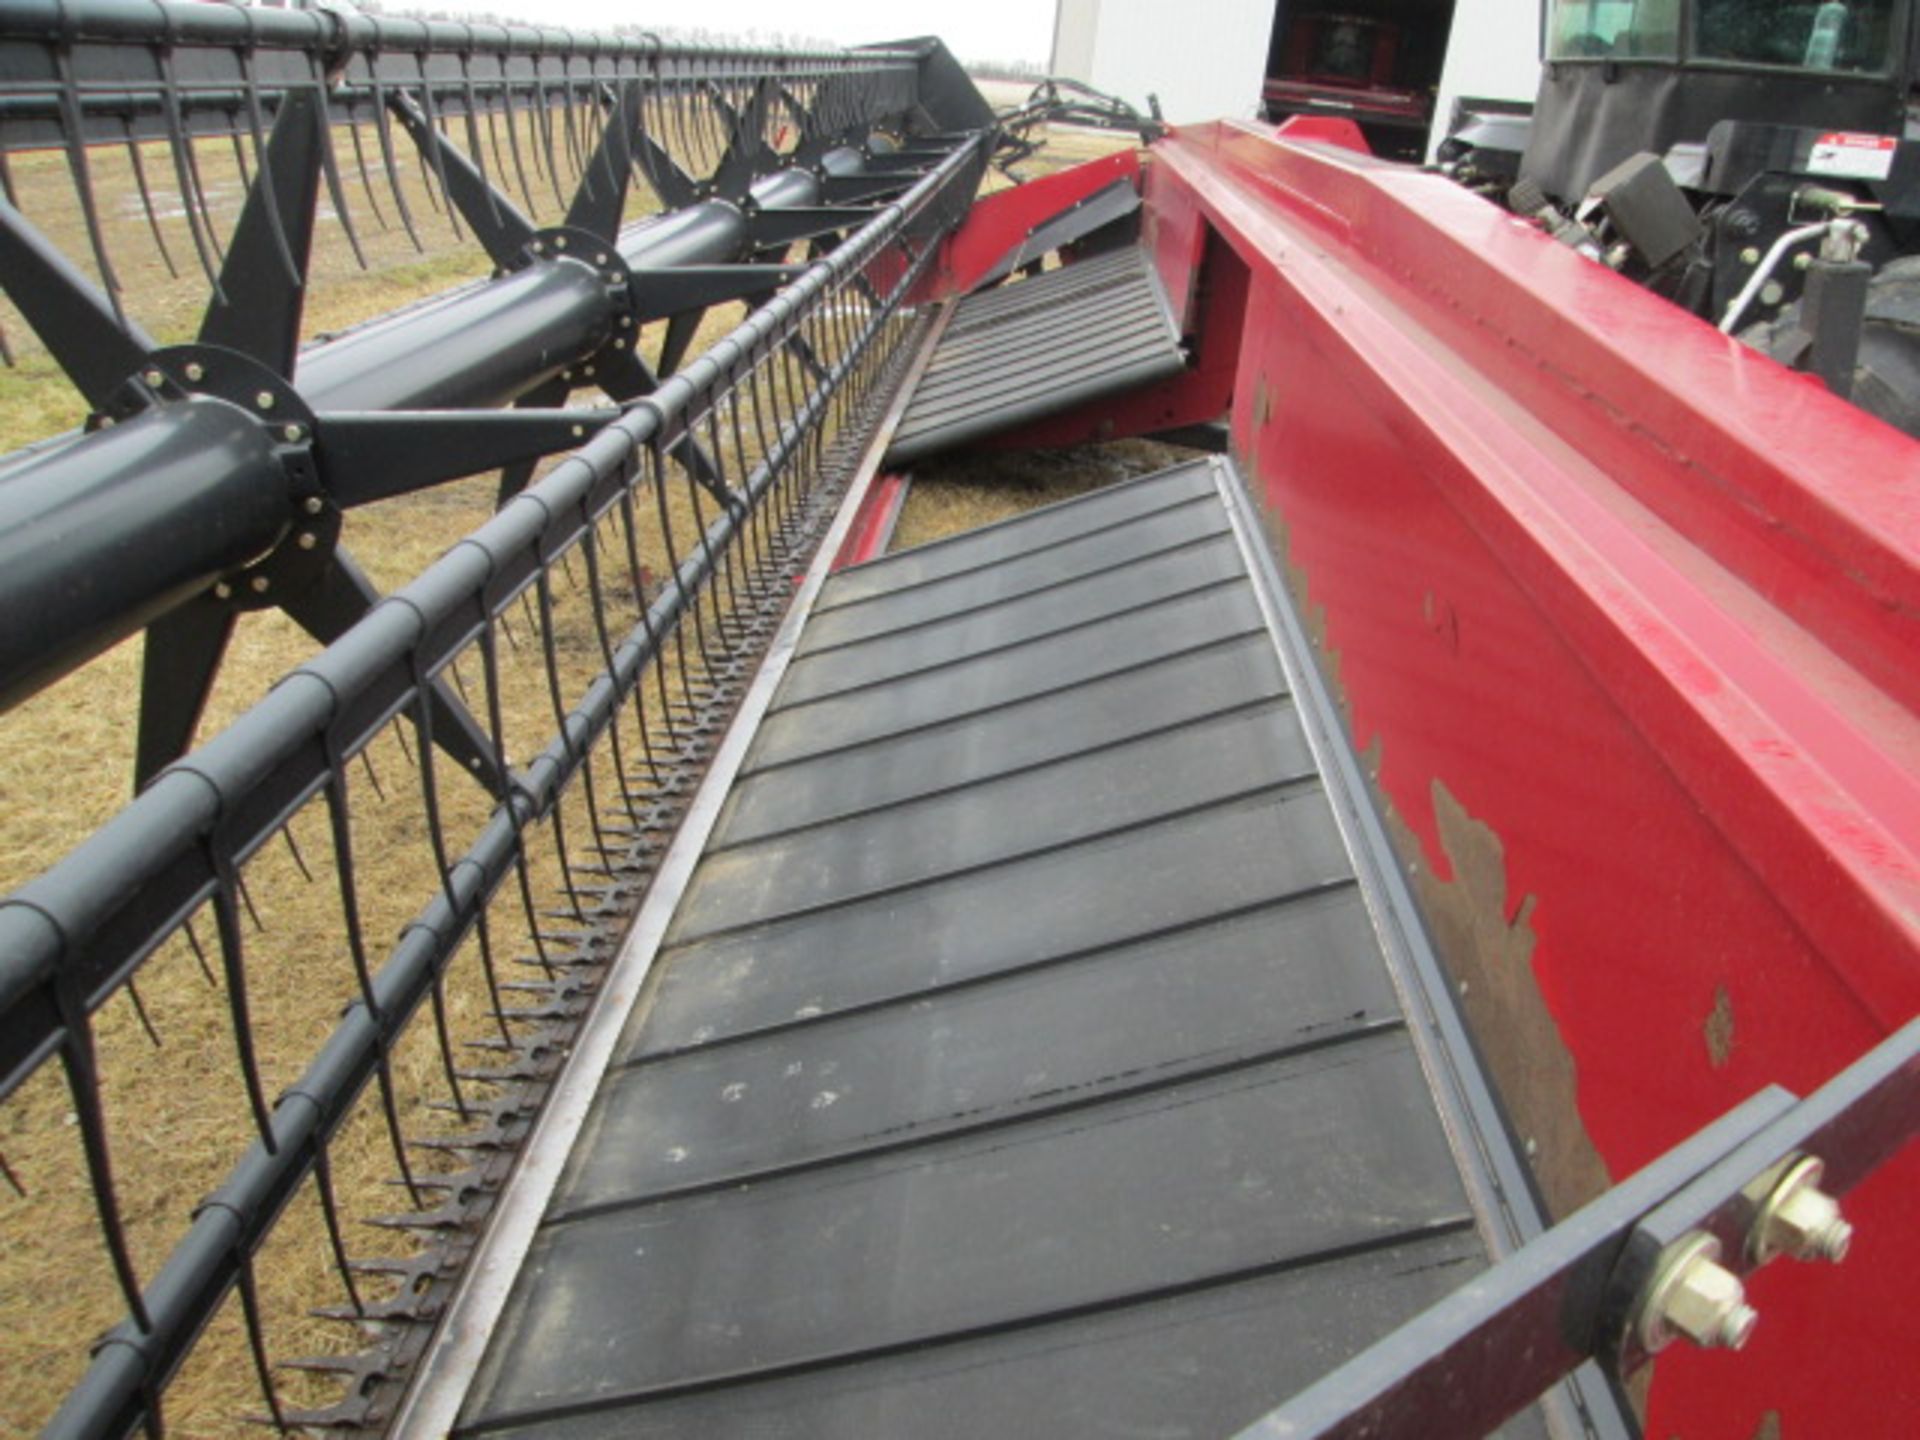 Case WDX 1202 S swather (2005), c/w 30' DHX 302 header (2007), showing 795 eng hr, dbl knife - Image 27 of 32